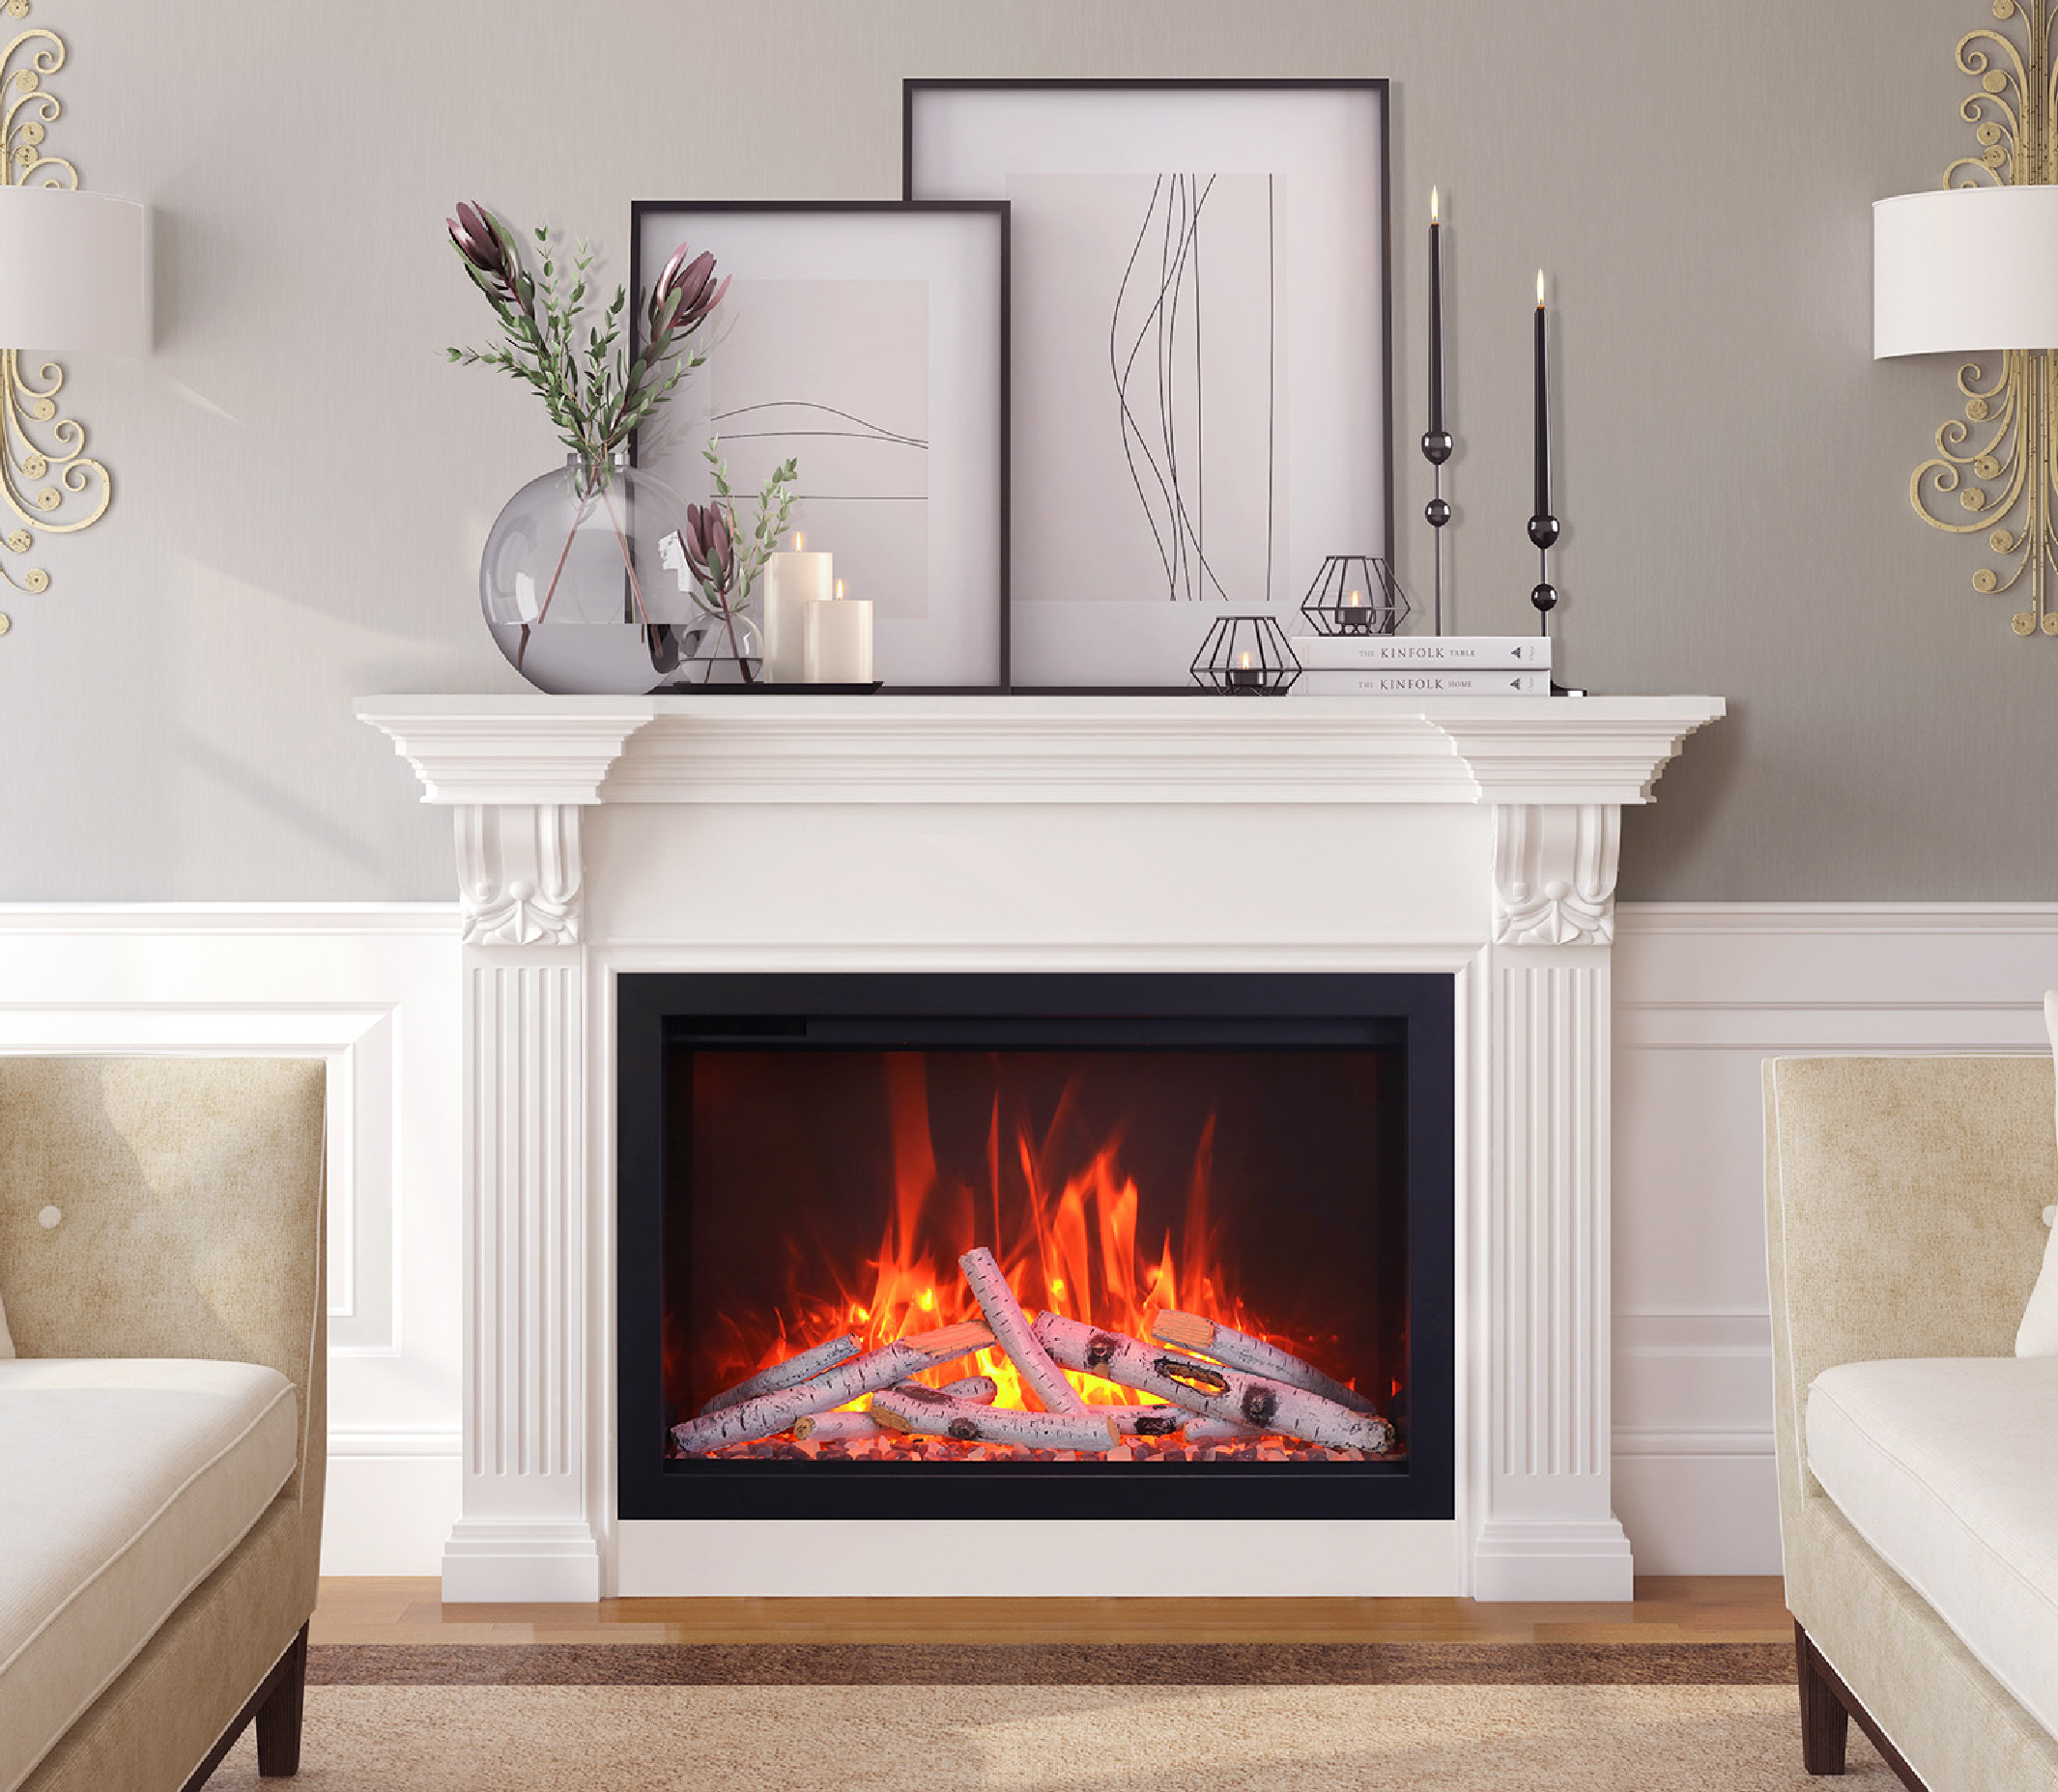 Replace Your Fireplace